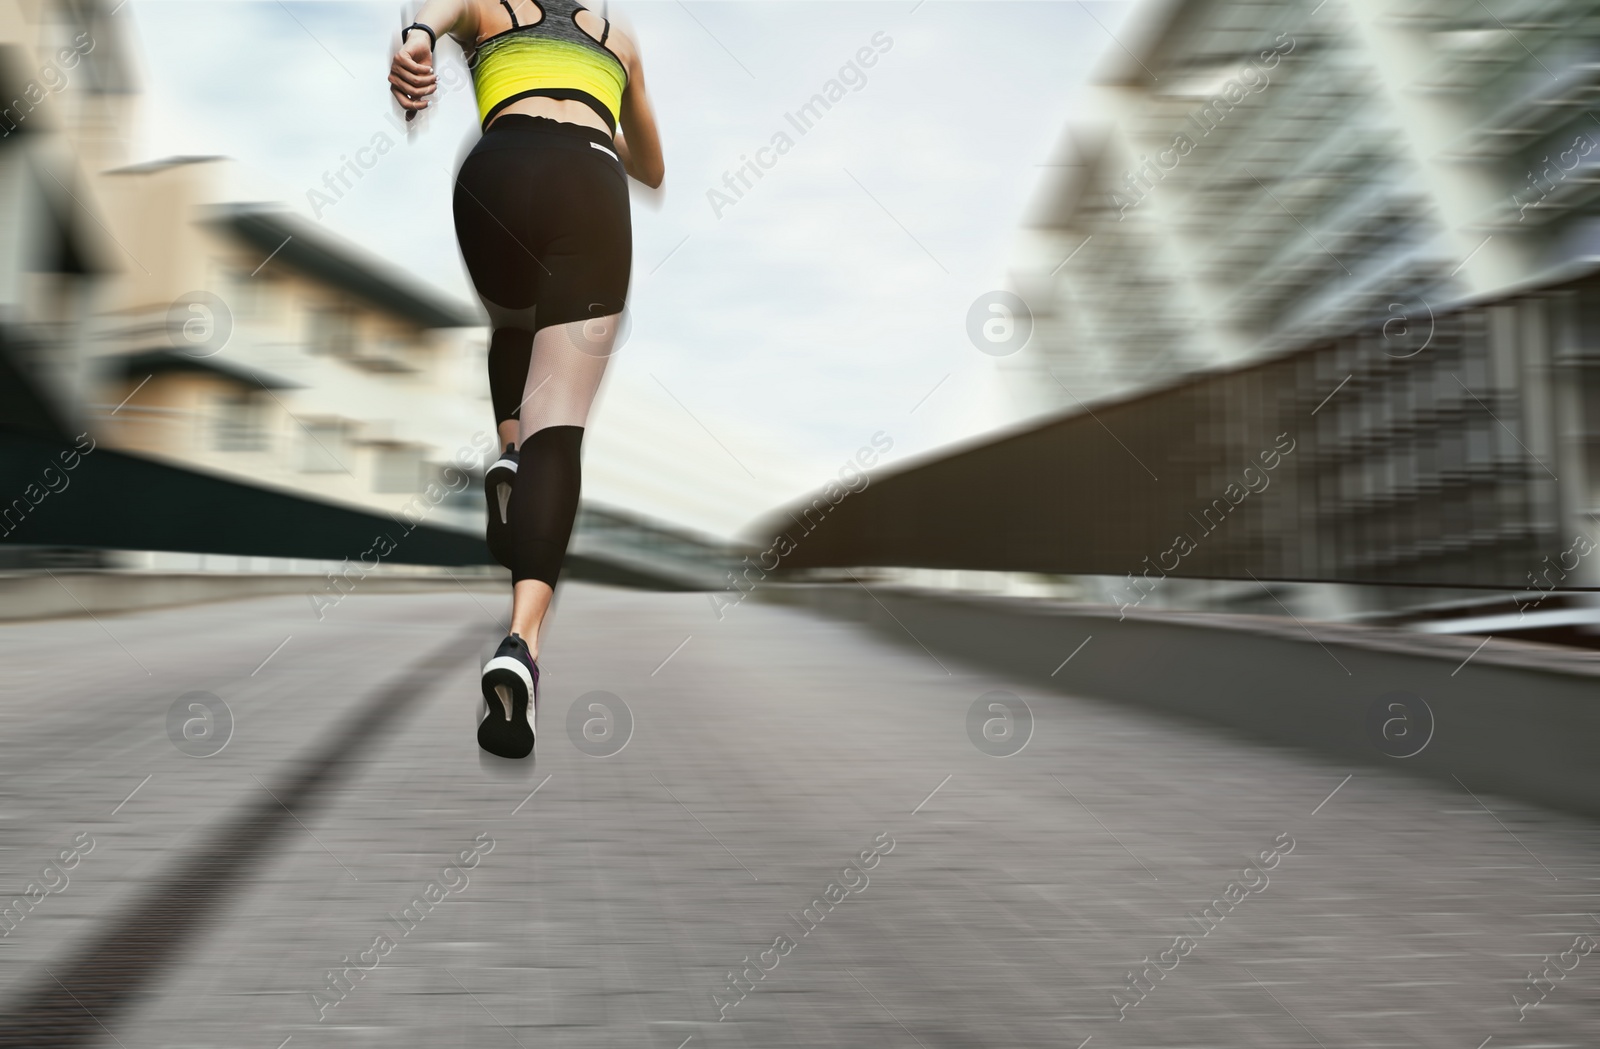 Image of Sporty young woman running on street, low angle view. Motion blur effect showing her speed